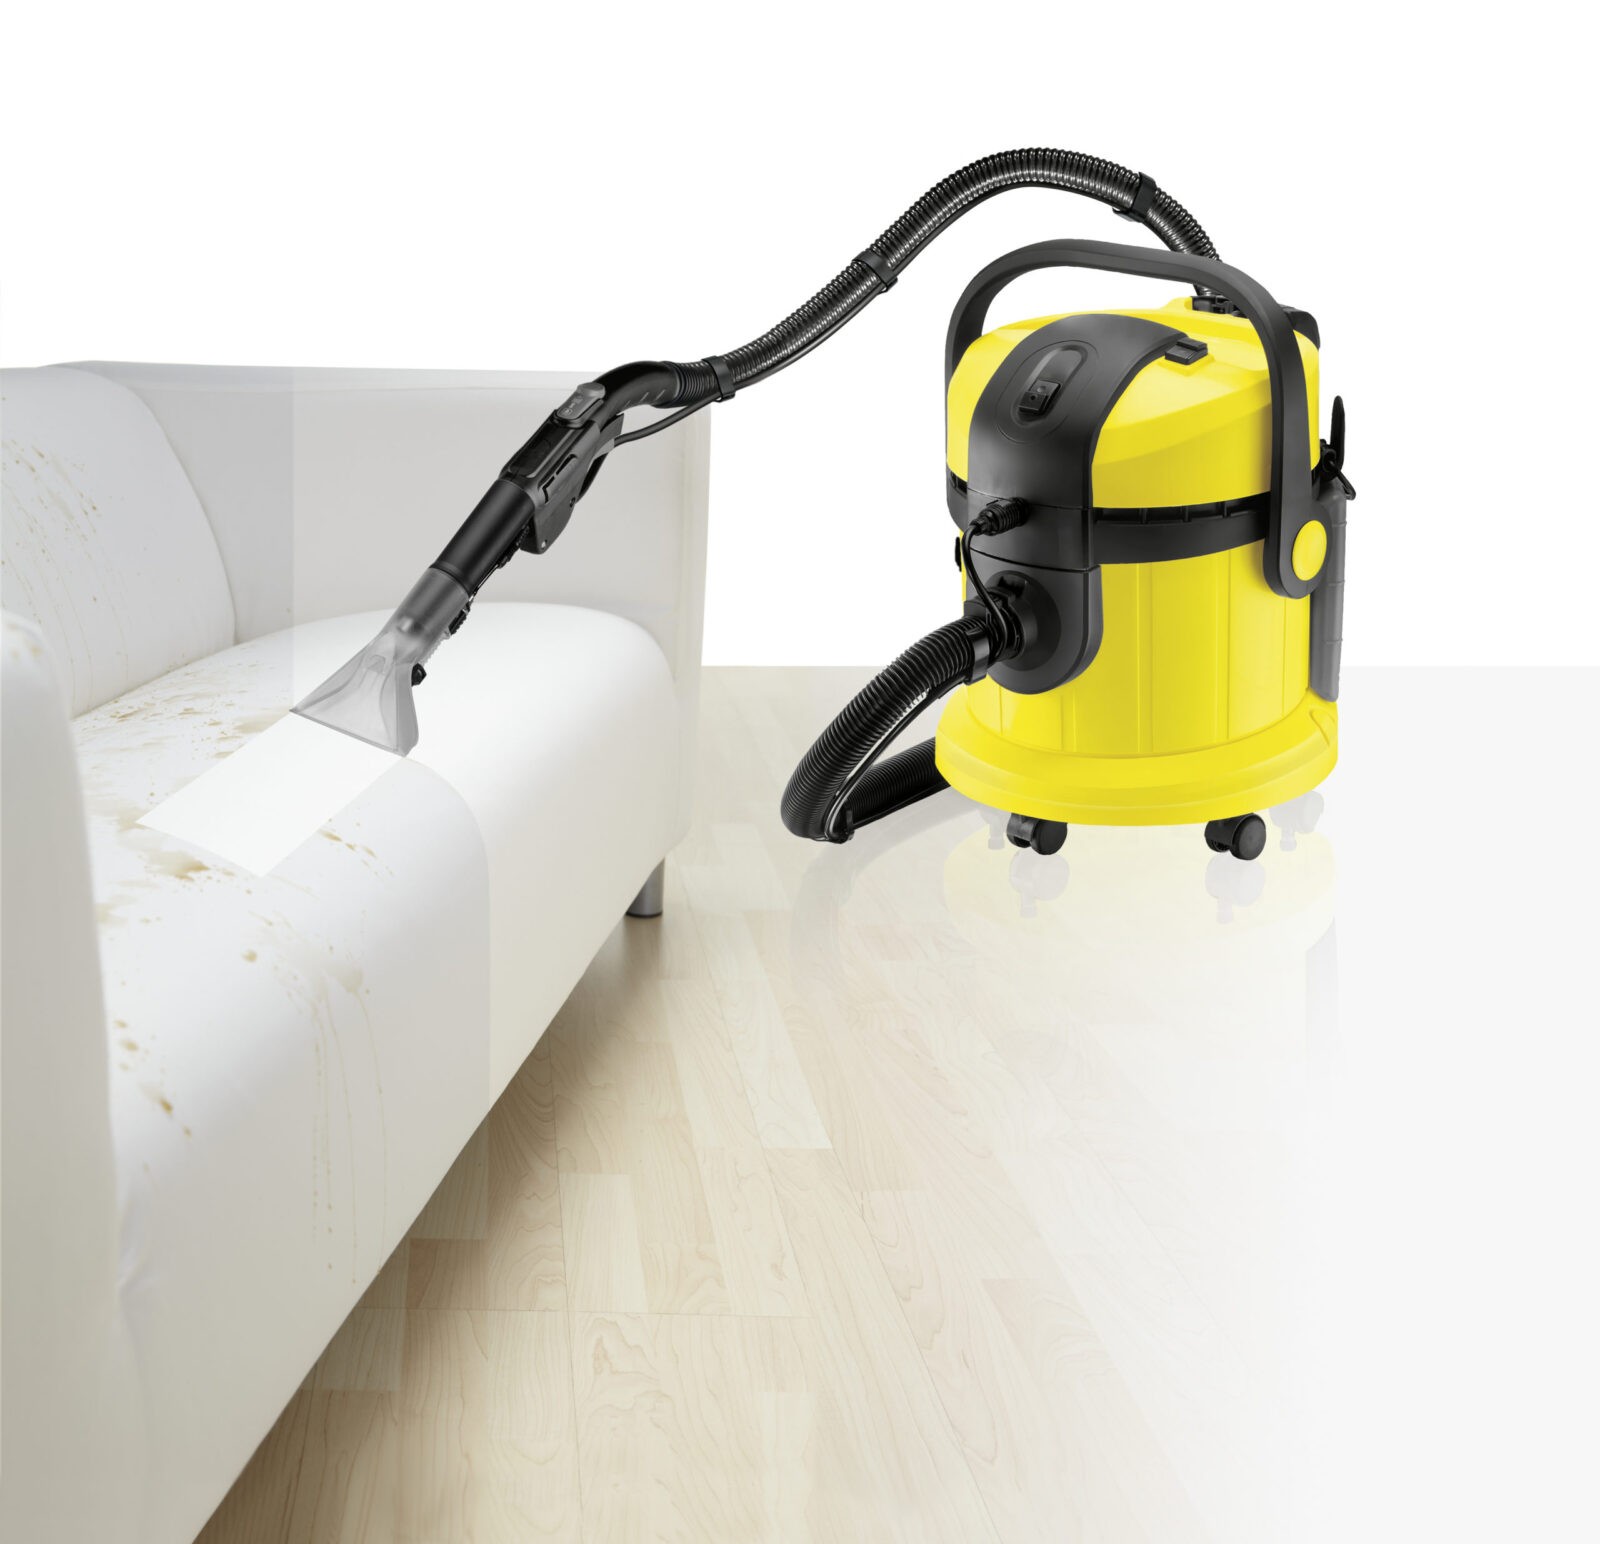 Washing vacuum cleaner Karcher SE 4002 *EU Wet and dry hoover  Dust-collecting fan Dust monitor Water cleaner - Price history & Review, AliExpress Seller - Kyzma Store